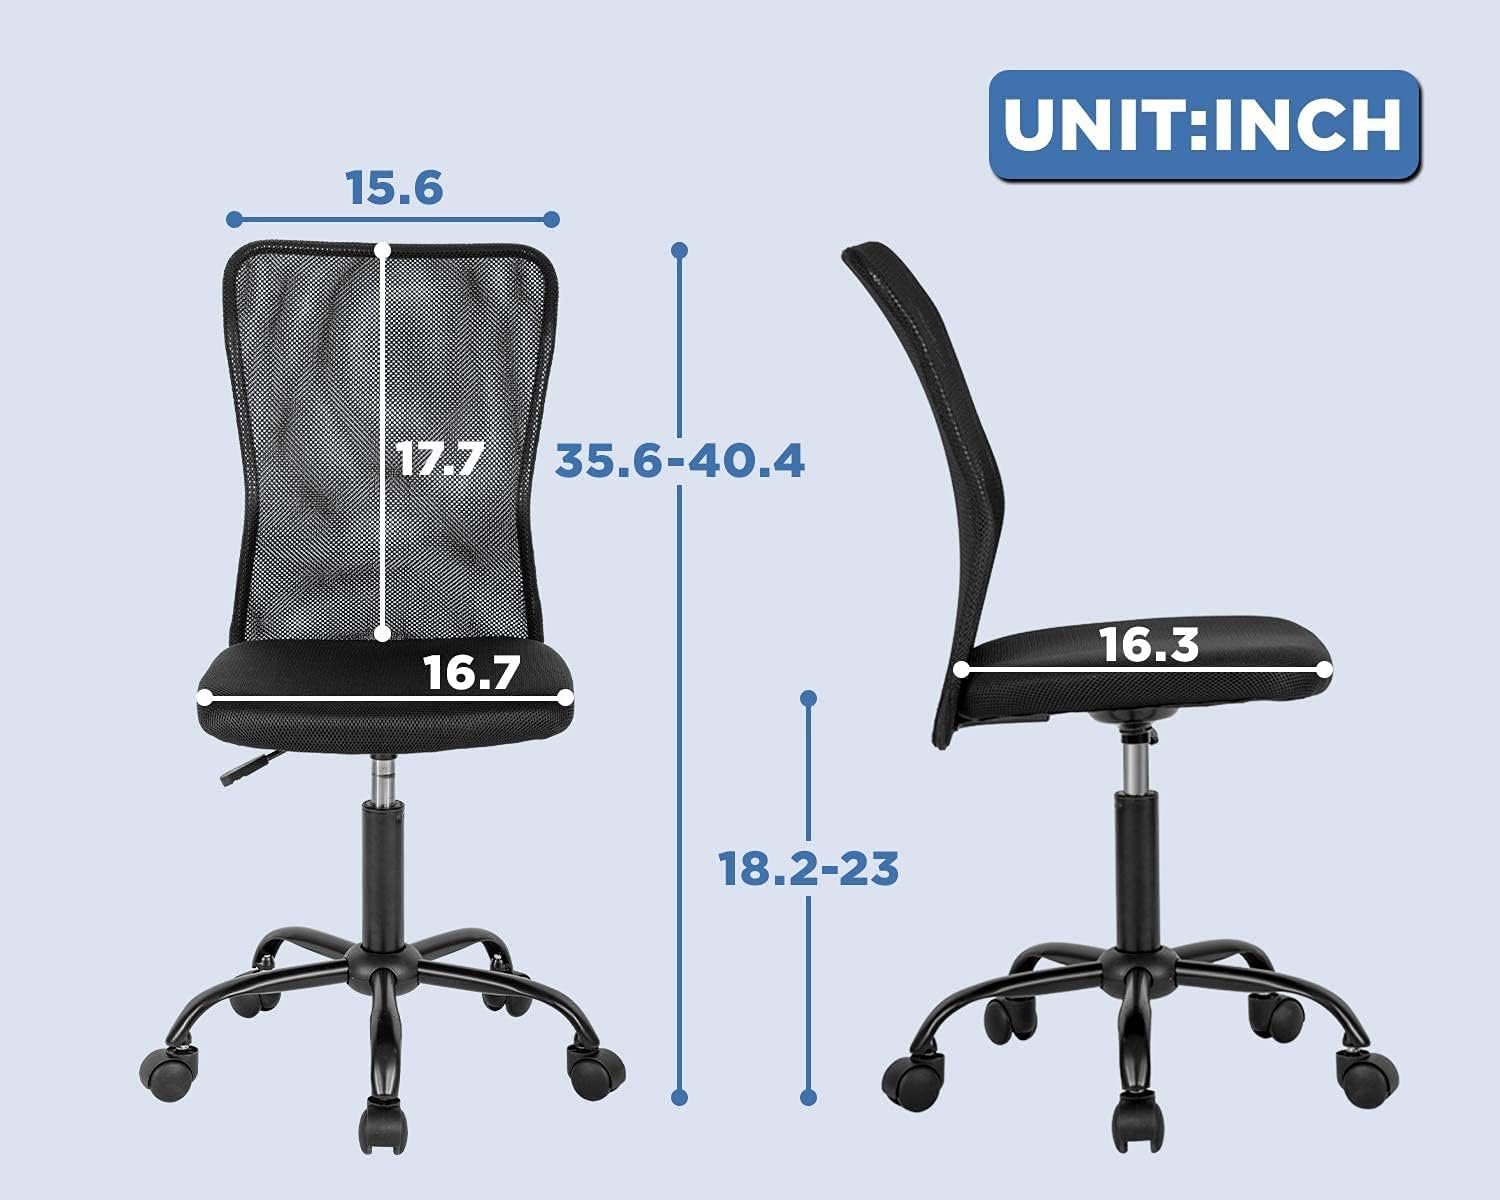 Home Office Chair Mid Back Mesh Desk Ergonomic Office Chair Cheap Desk Chair Armless Computer Chair Rolling Chair Adjustable Modern Chair with Lumbar Support for Women Men Adult Black